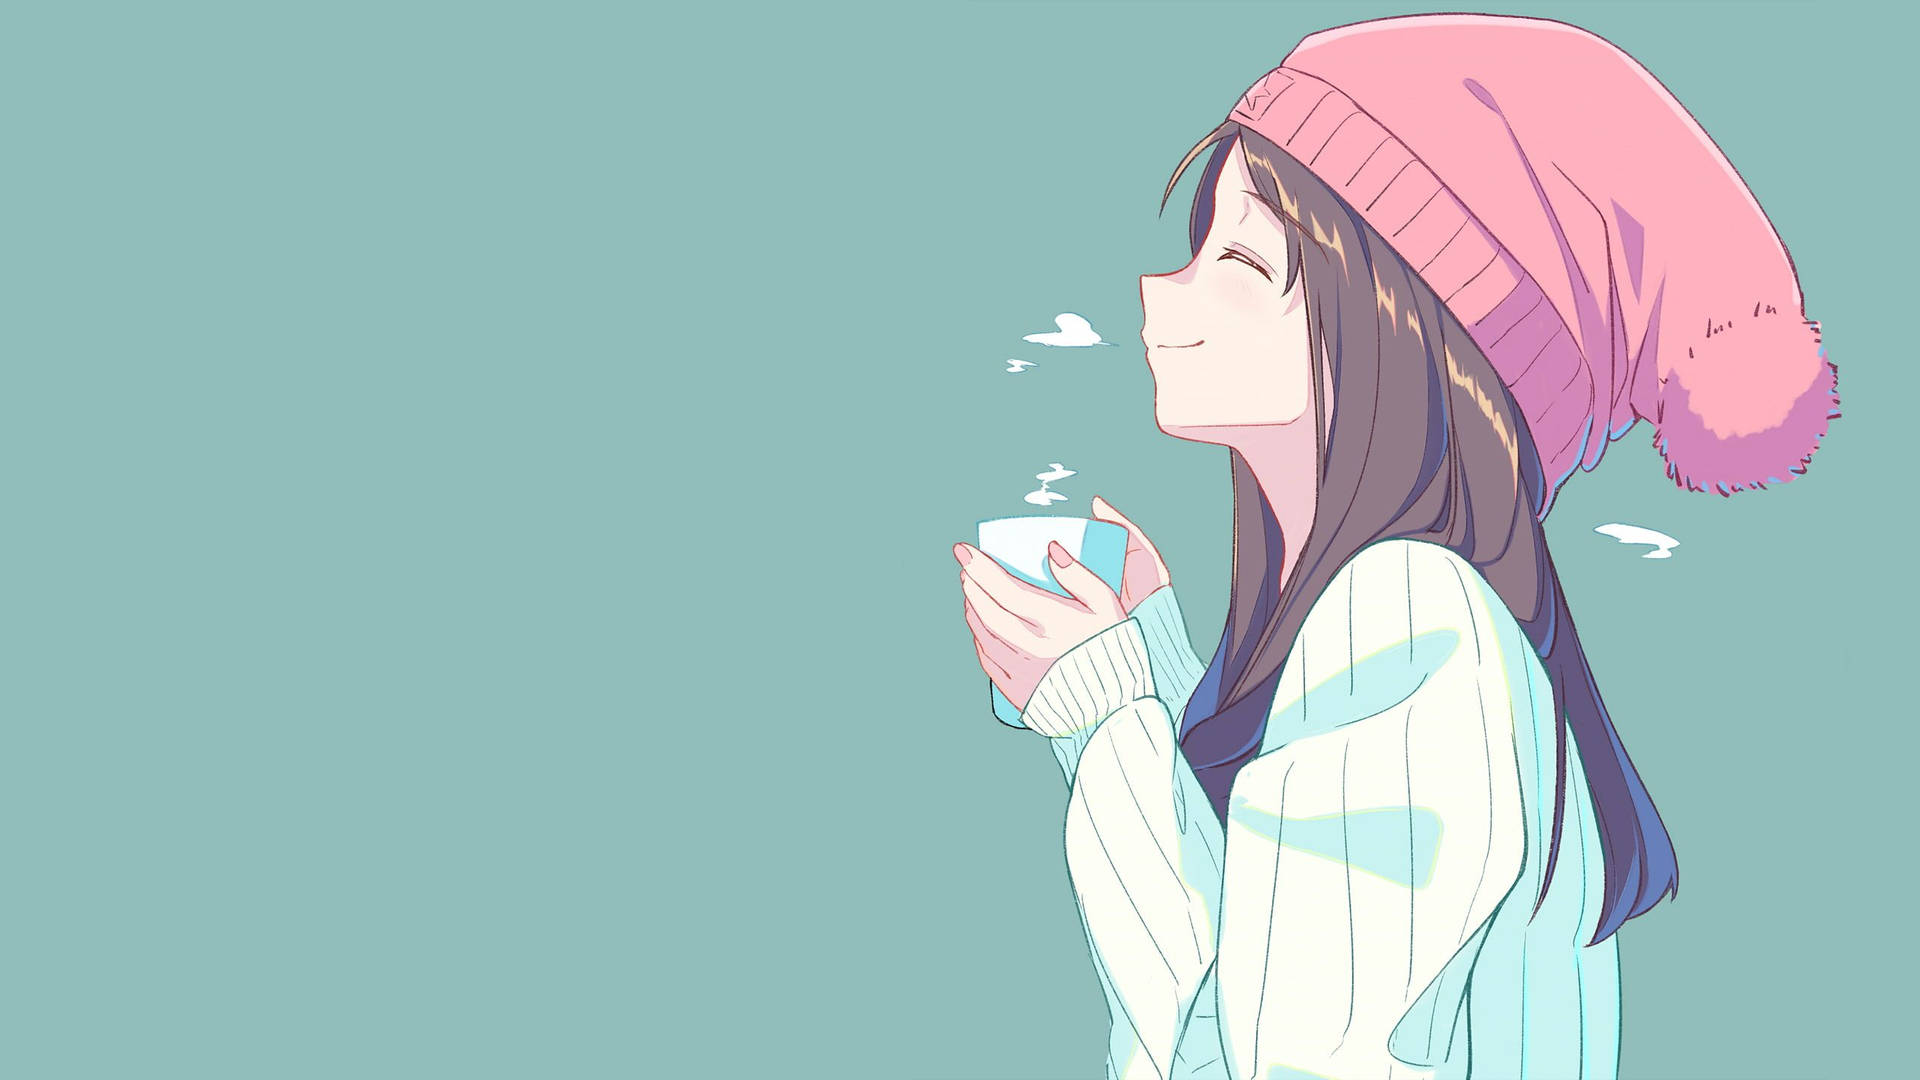 a girl in a pink hat drinking coffee Wallpaper